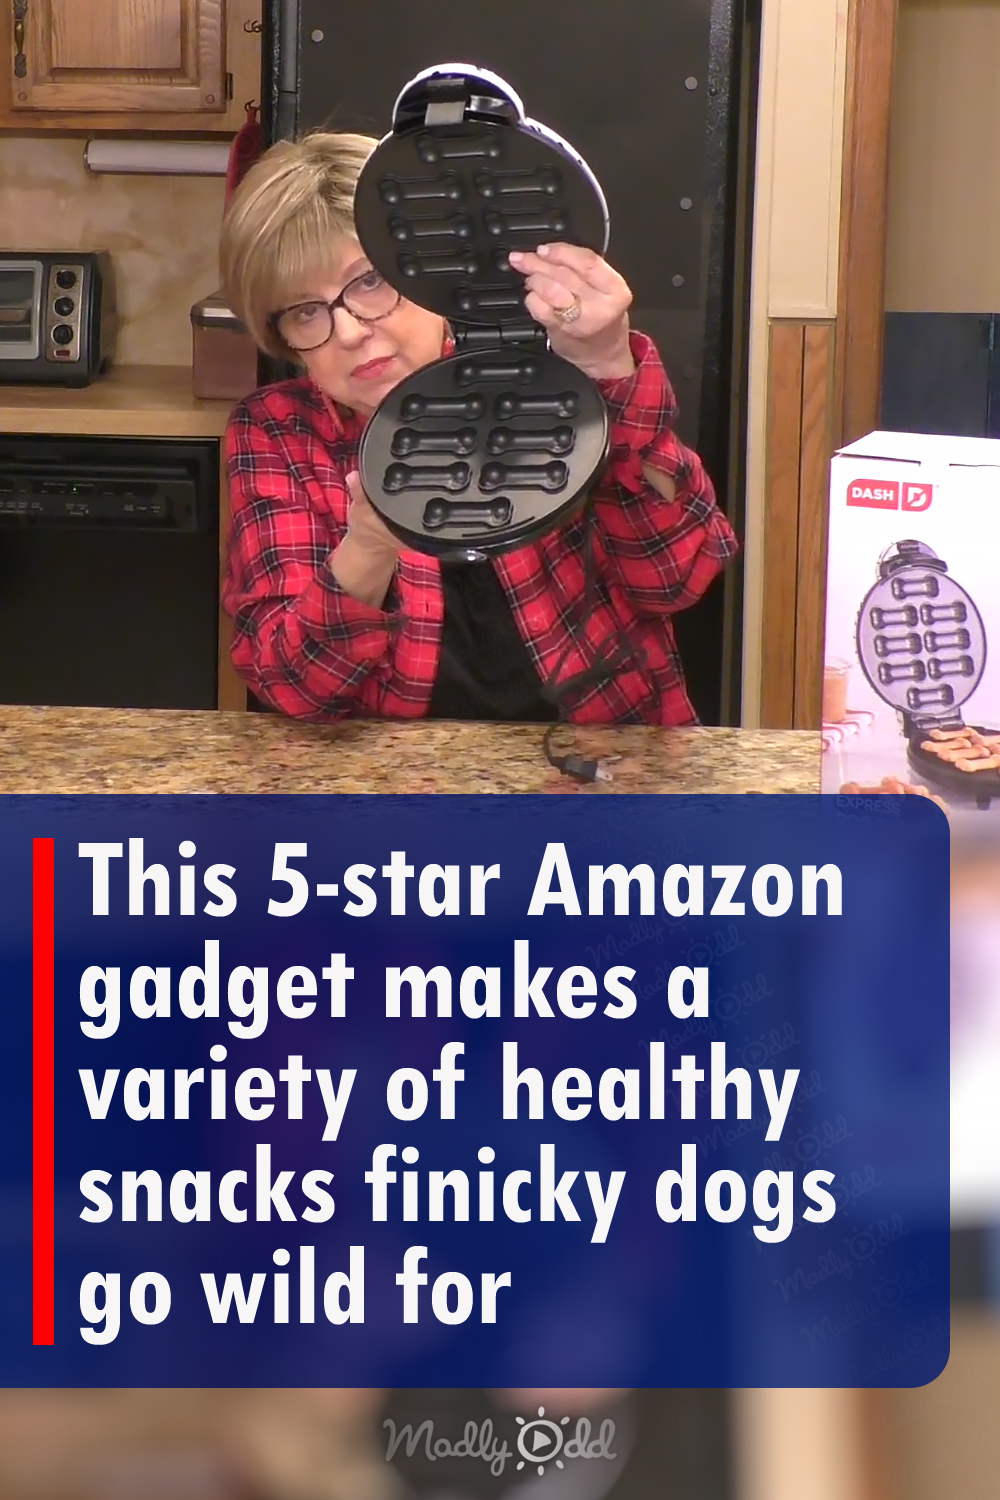 5-star Amazon gadget makes healthy treats dogs go crazy for